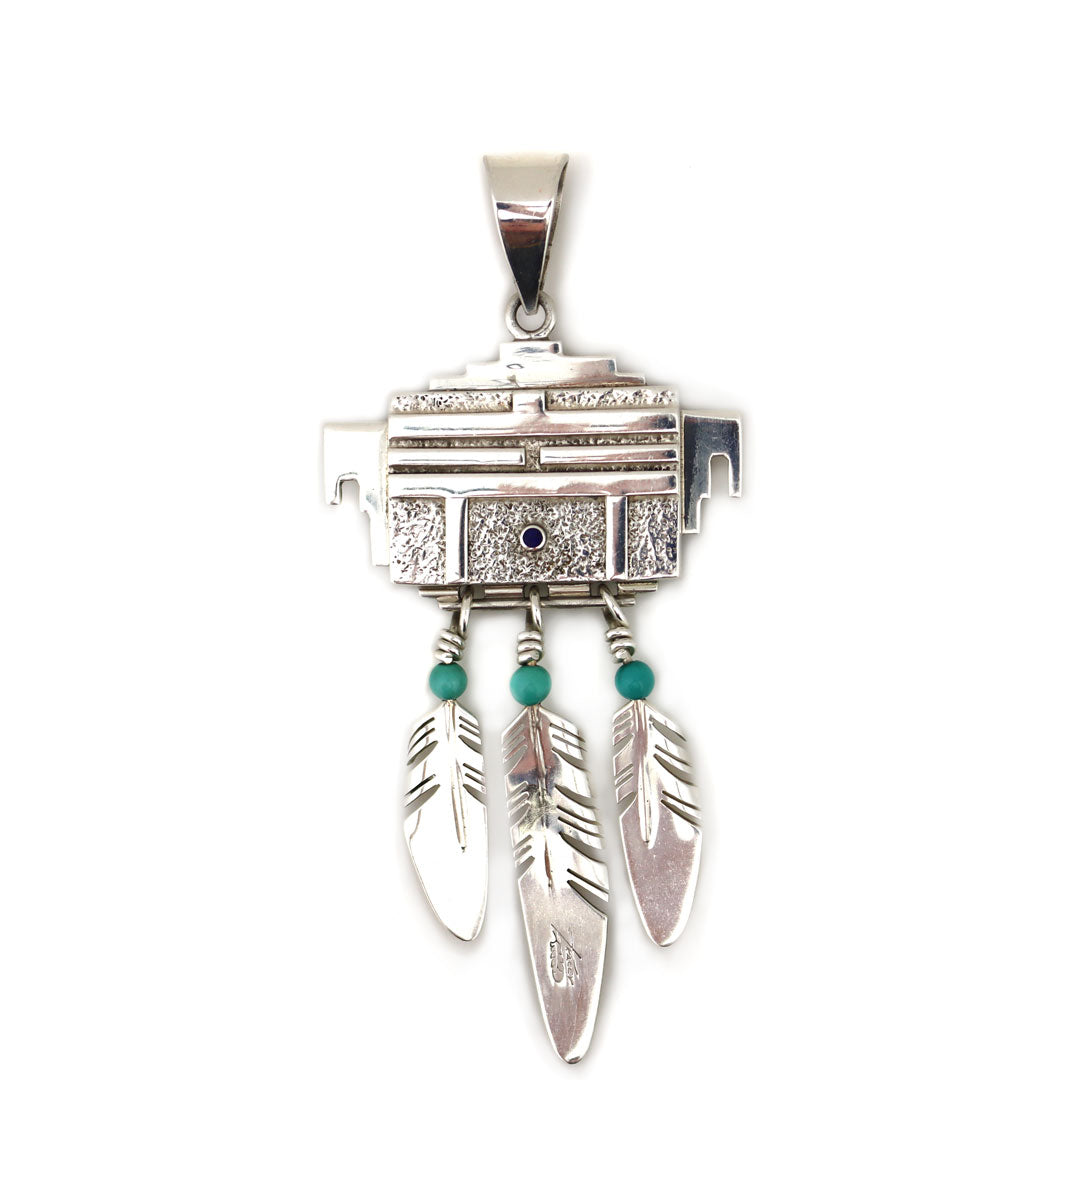 Ray Tracey (b. 1953) - Navajo Contemporary Multi-Stone Inlay and Sterling Silver Kachina Pendant, 3.5" x 1.625" (J91318C-0422-001) 1